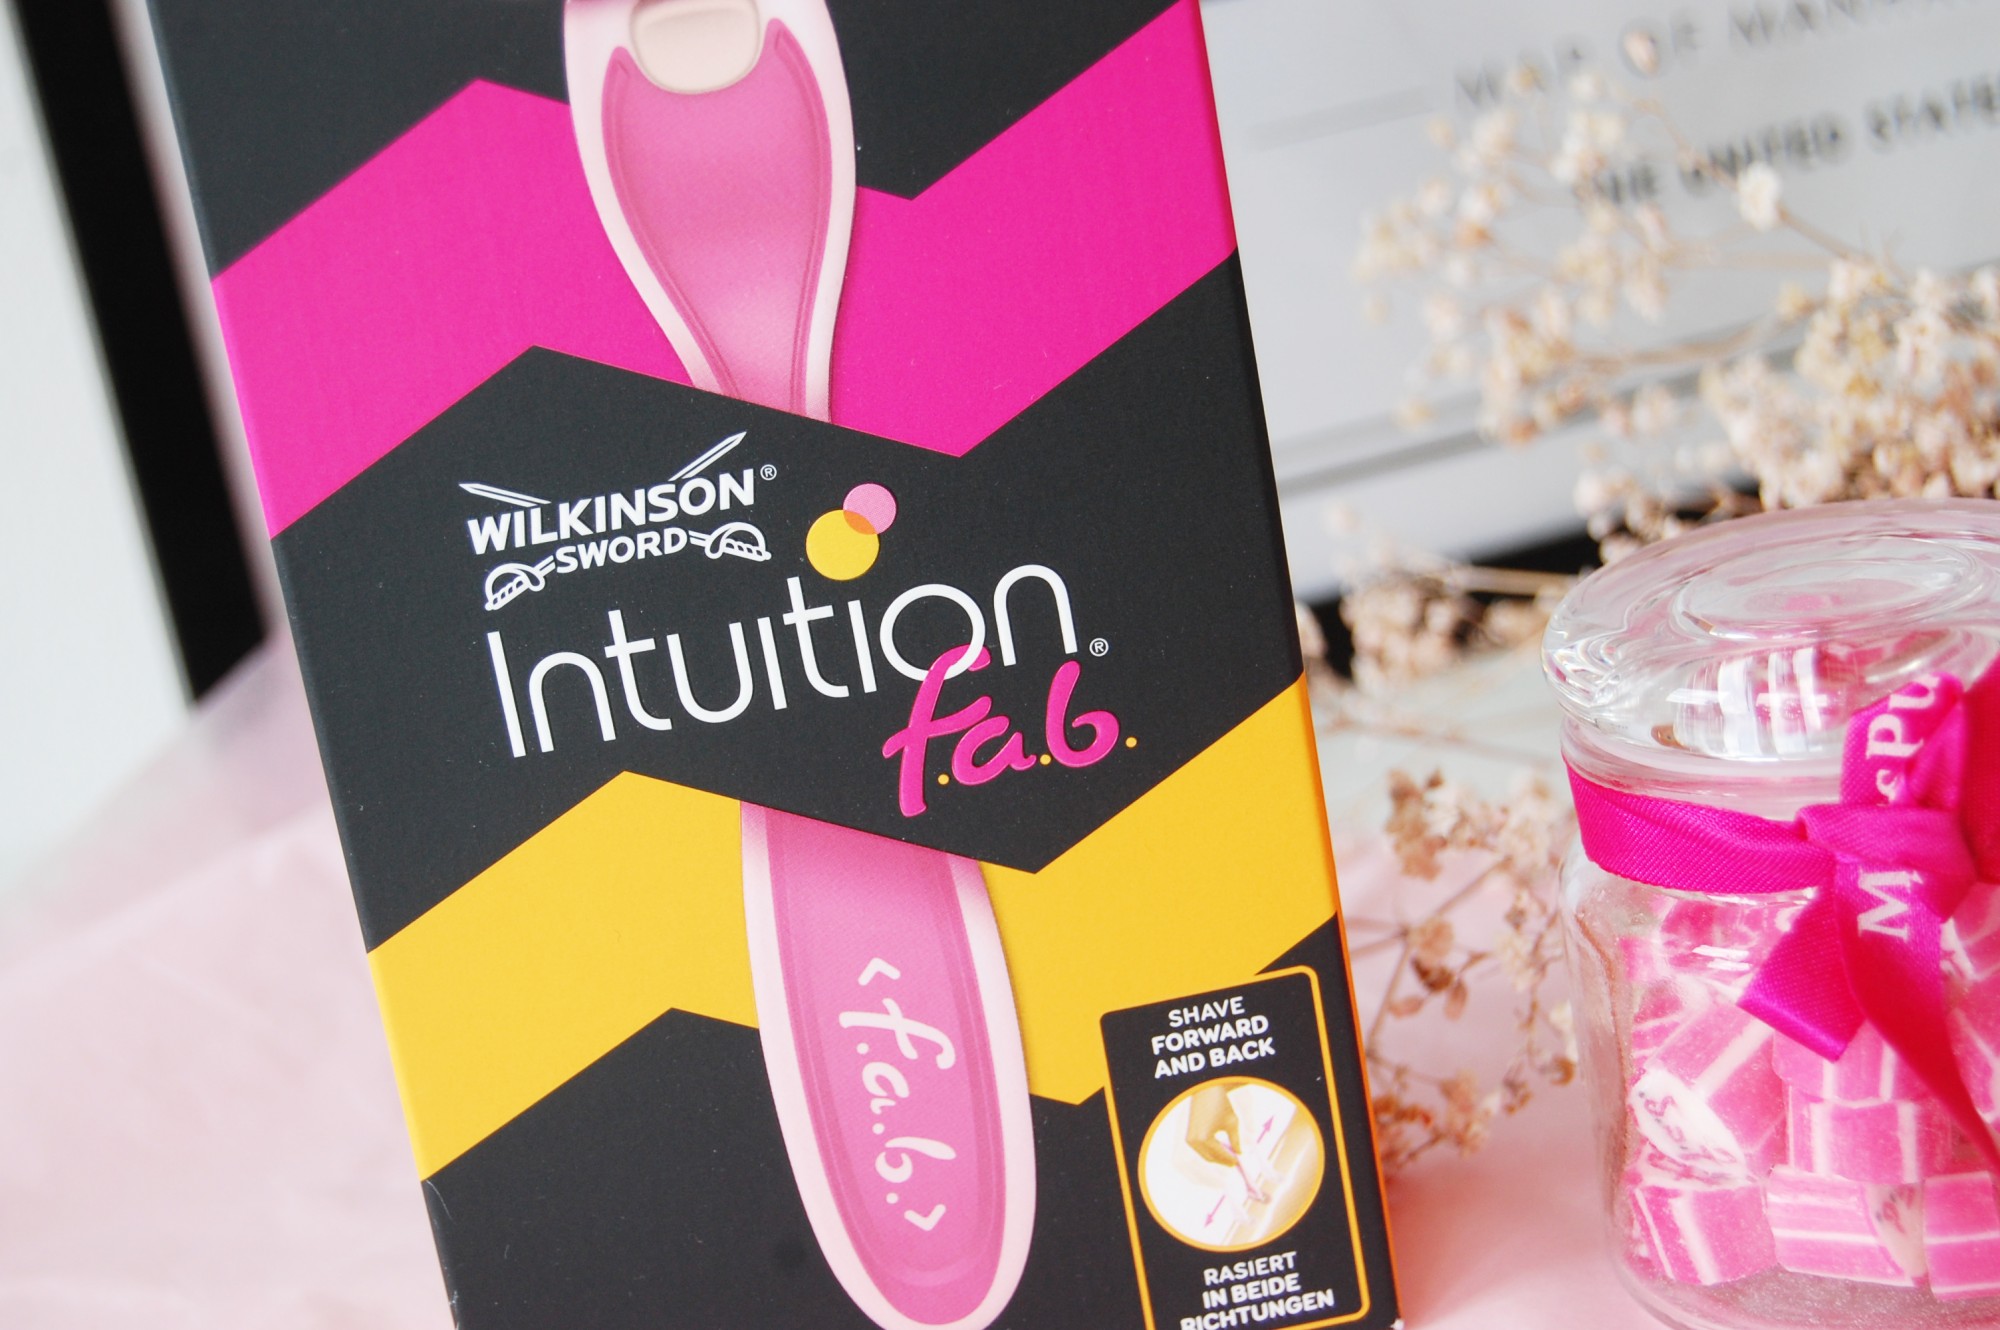 Wilkinson Sword Intuition f.a.b.